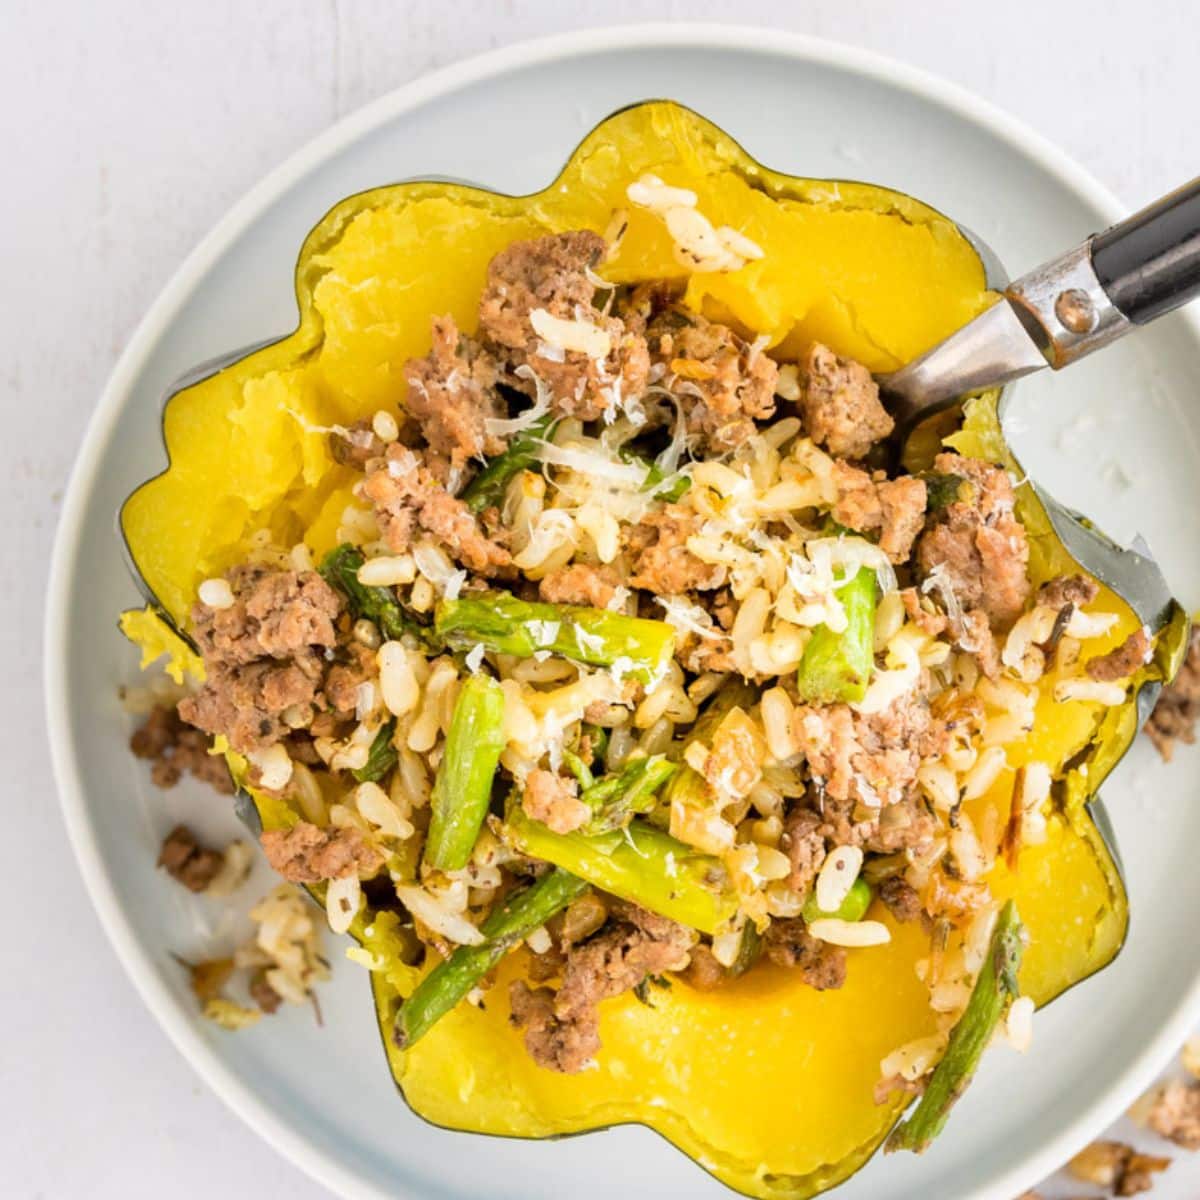 acorn squash stuffed with ground beef, rice, asparagus